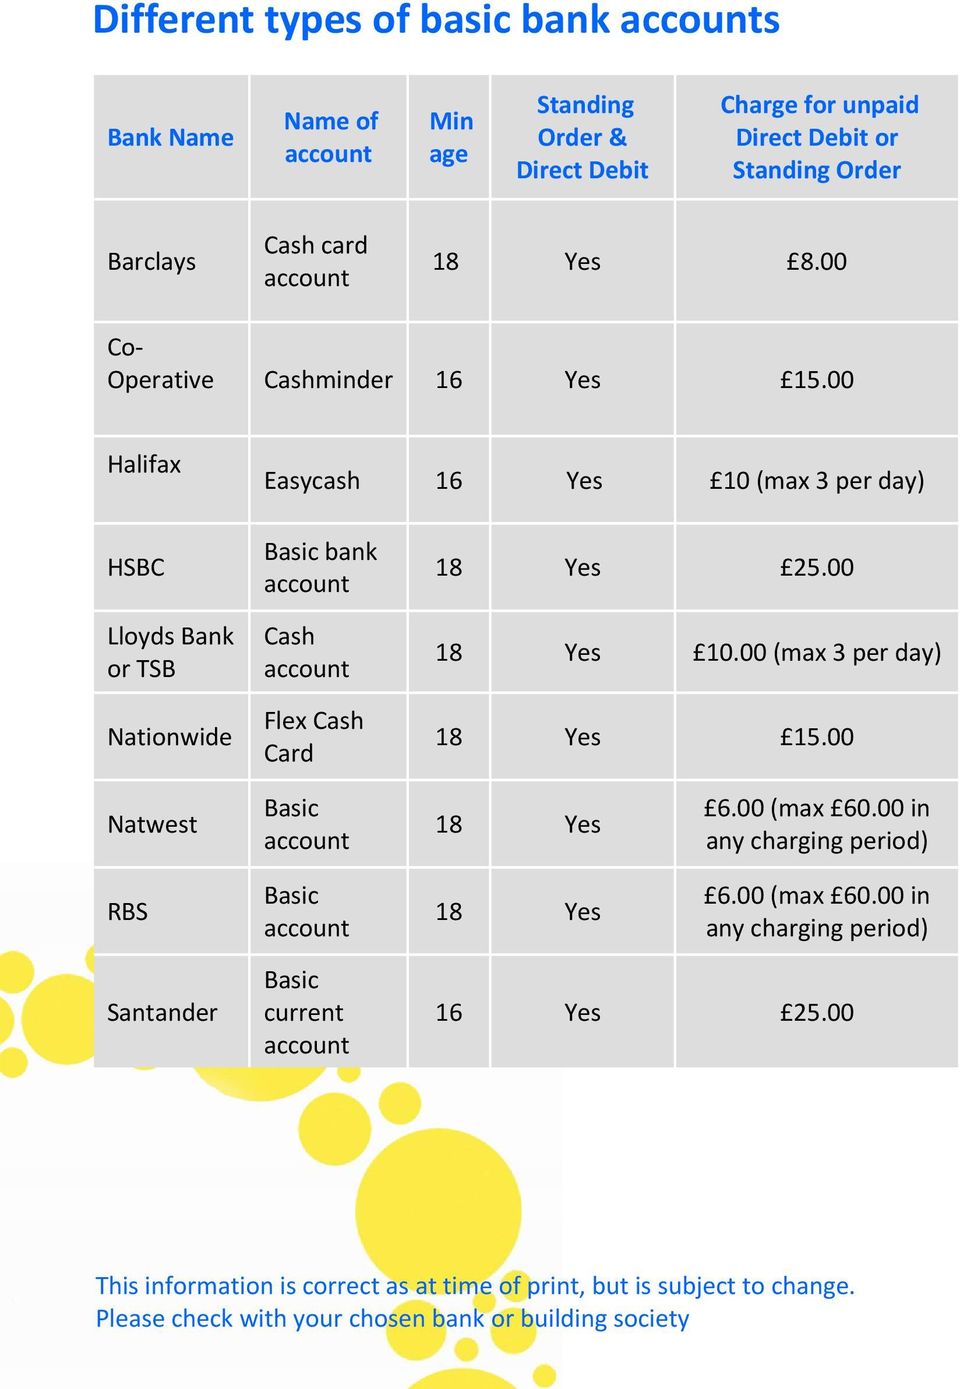 00 18 Yes 10.00 (max 3 per day) 18 Yes 15.00 Natwest Basic 18 Yes 6.00 (max 60.00 in any charging period) RBS Basic 18 Yes 6.00 (max 60.00 in any charging period) Santander Basic current 16 Yes 25.